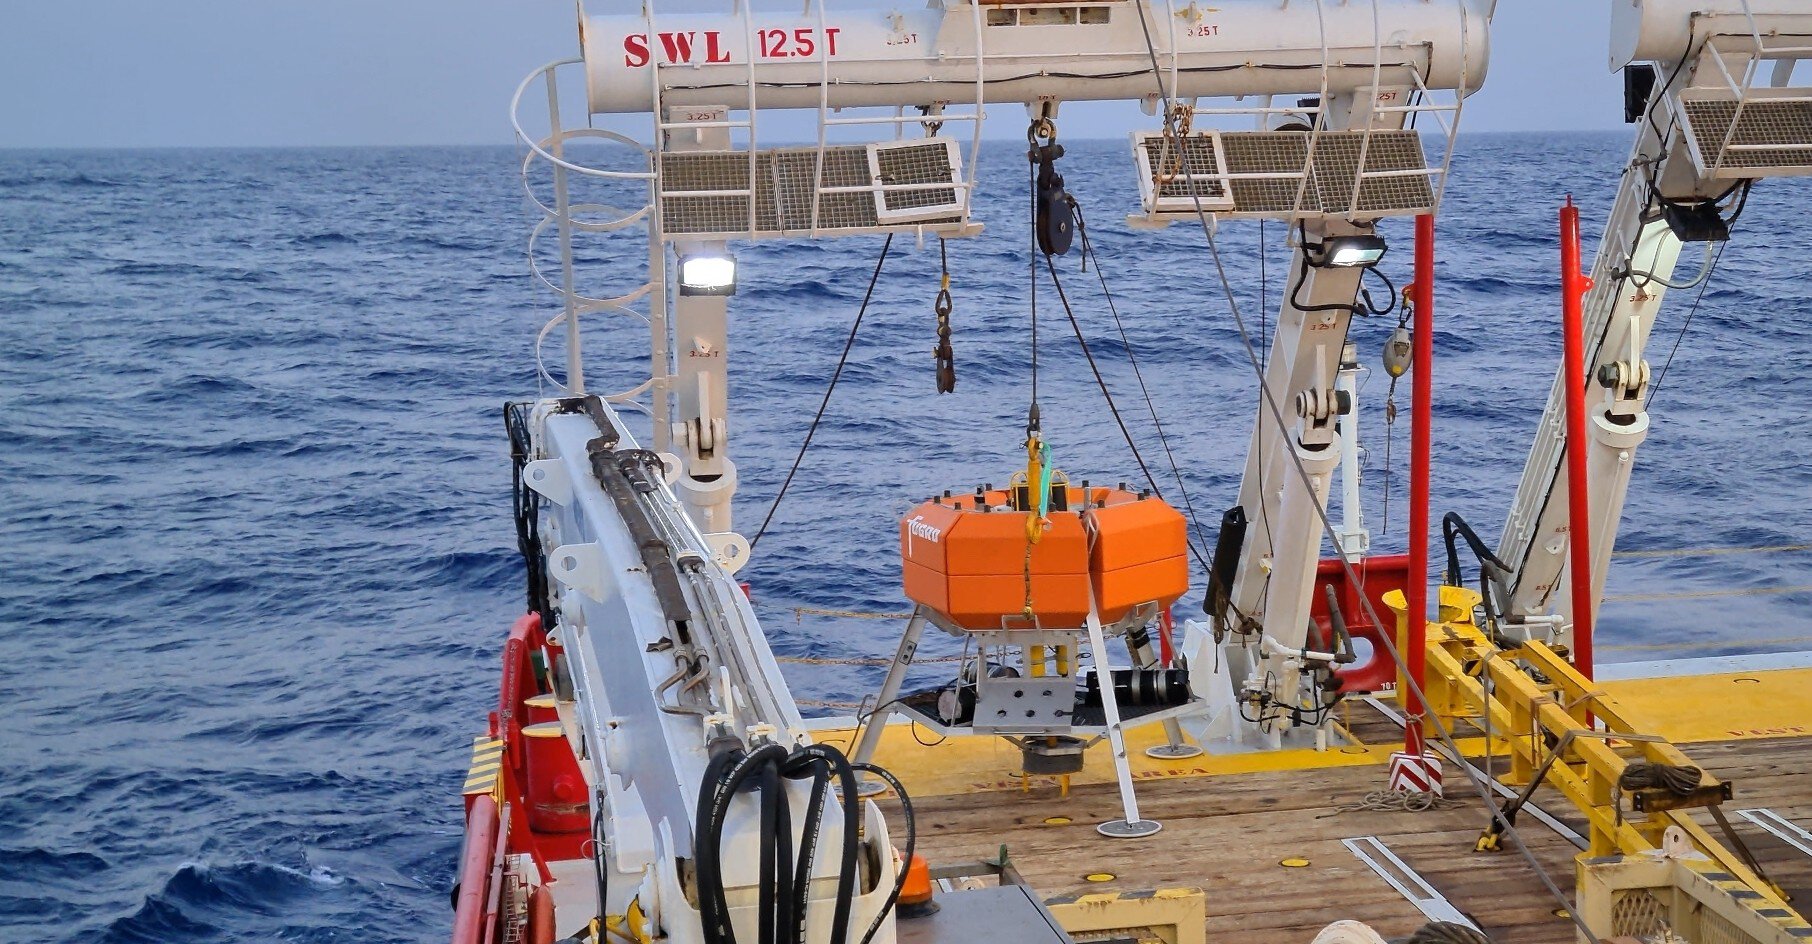 Fugro's autonomous environmental landers being tested off the coast of Saudi Arabia. The deepwater landers are a cost-effective, reusable and reconfigurable platform, making them ideal for obtaining large volumes of oceanographic data in waters that are historically understudied. The landers can host multiple sensors to monitor and measure a variety of environmental parameters for months at a time in water depths of 10 m to 6000 m.